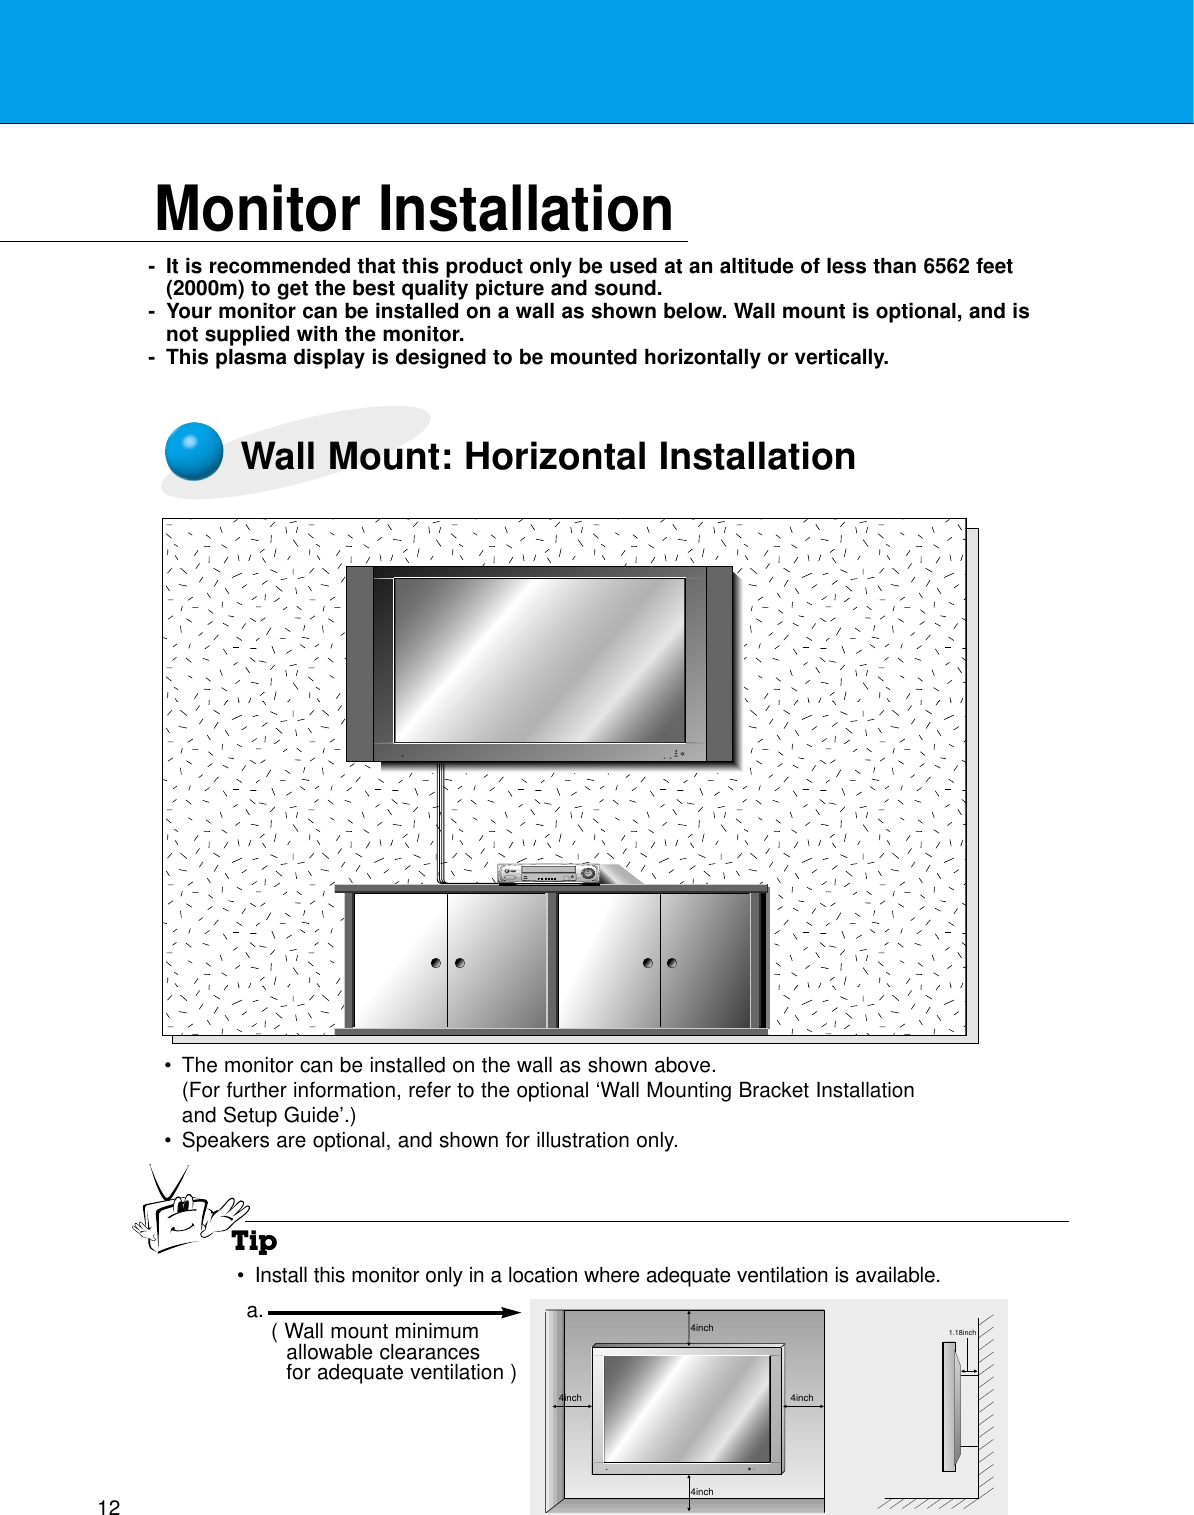 12Monitor Installation- It is recommended that this product only be used at an altitude of less than 6562 feet(2000m) to get the best quality picture and sound.- Your monitor can be installed on a wall as shown below. Wall mount is optional, and isnot supplied with the monitor.- This plasma display is designed to be mounted horizontally or vertically.Wall Mount: Horizontal Installation•The monitor can be installed on the wall as shown above.(For further information, refer to the optional ‘Wall Mounting Bracket Installationand Setup Guide’.)•Speakers are optional, and shown for illustration only.Tip•Install this monitor only in a location where adequate ventilation is available.4inch4inch4inch4inch1.18incha. ( Wall mount minimumallowable clearancesfor adequate ventilation )